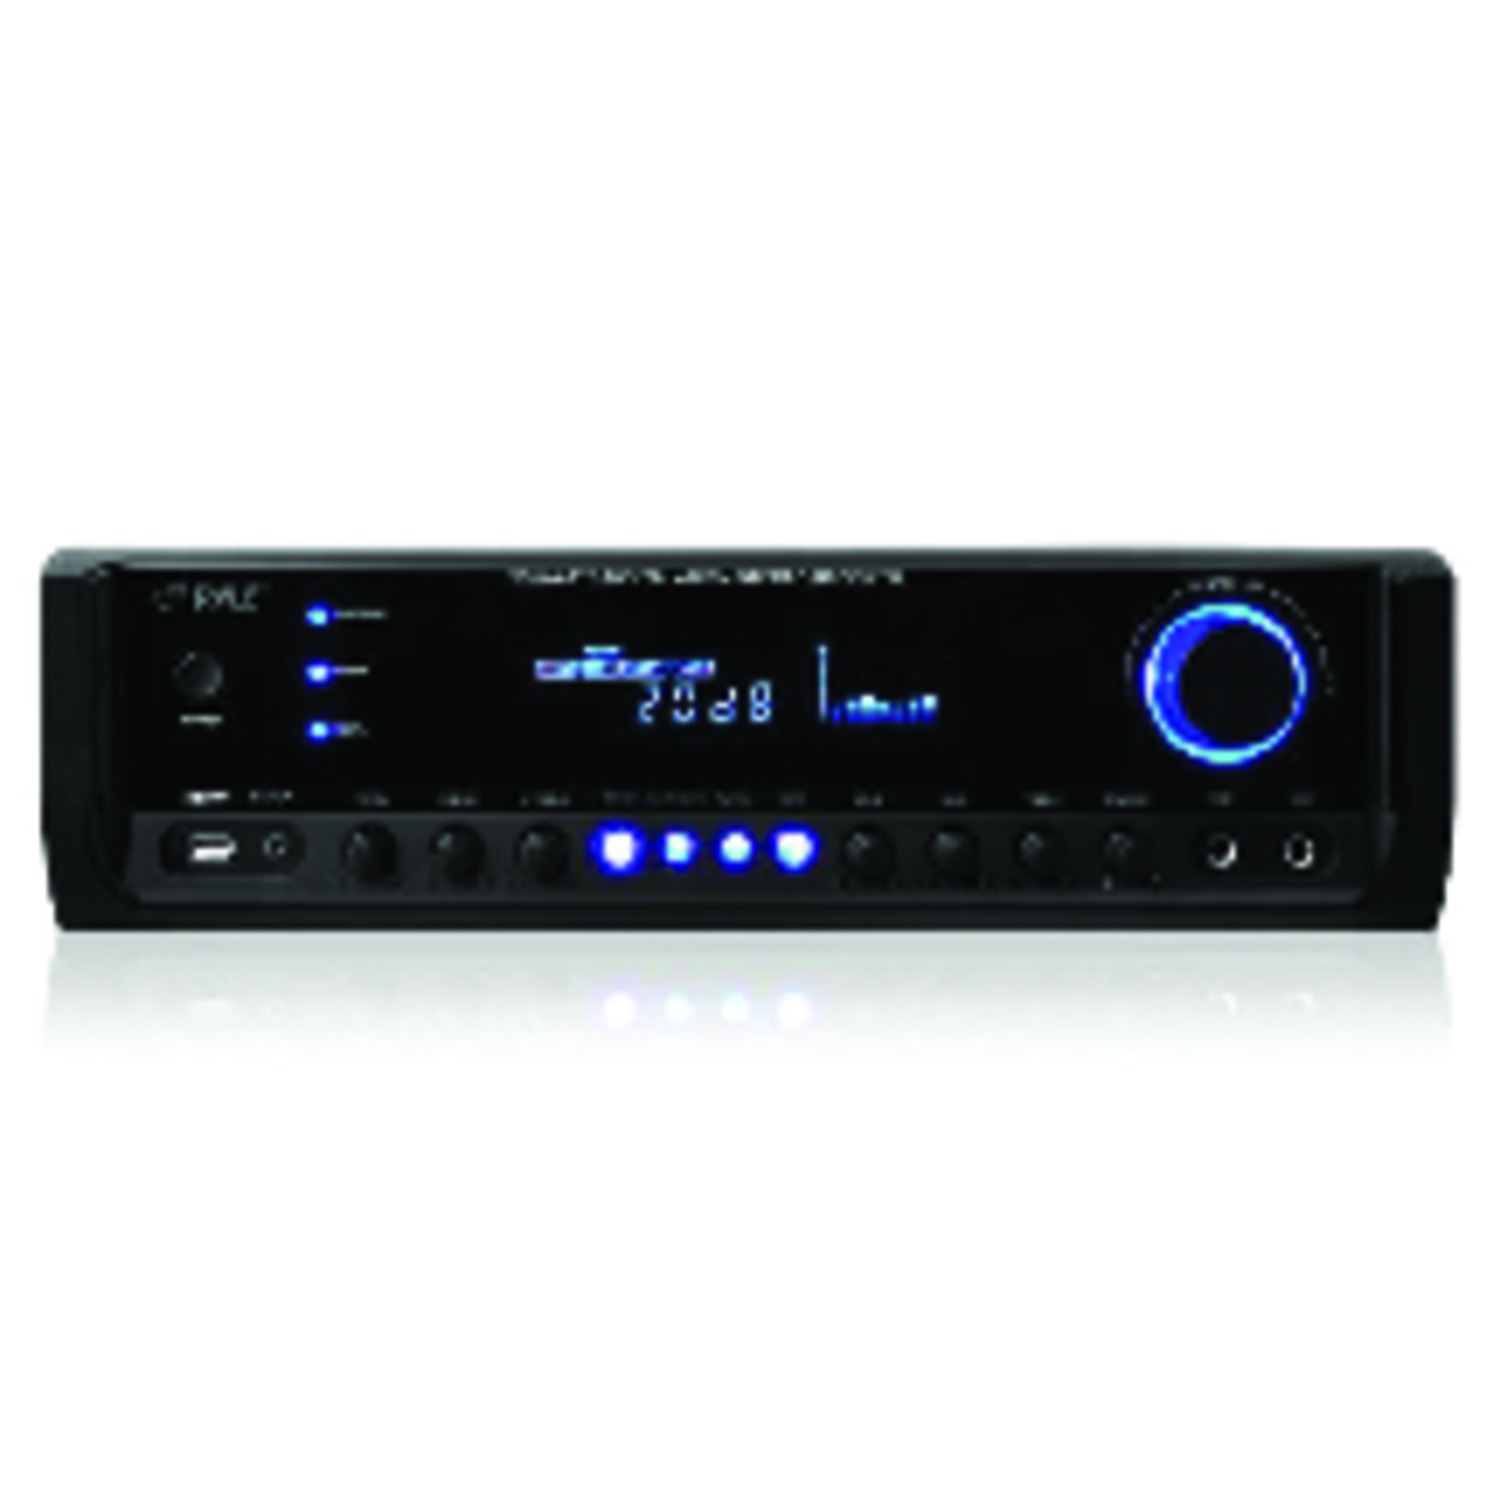 New Pyle PT390AU 300W 4 Channel Home Theater Amplifier Receiver Stereo USB/SD - image 2 of 6